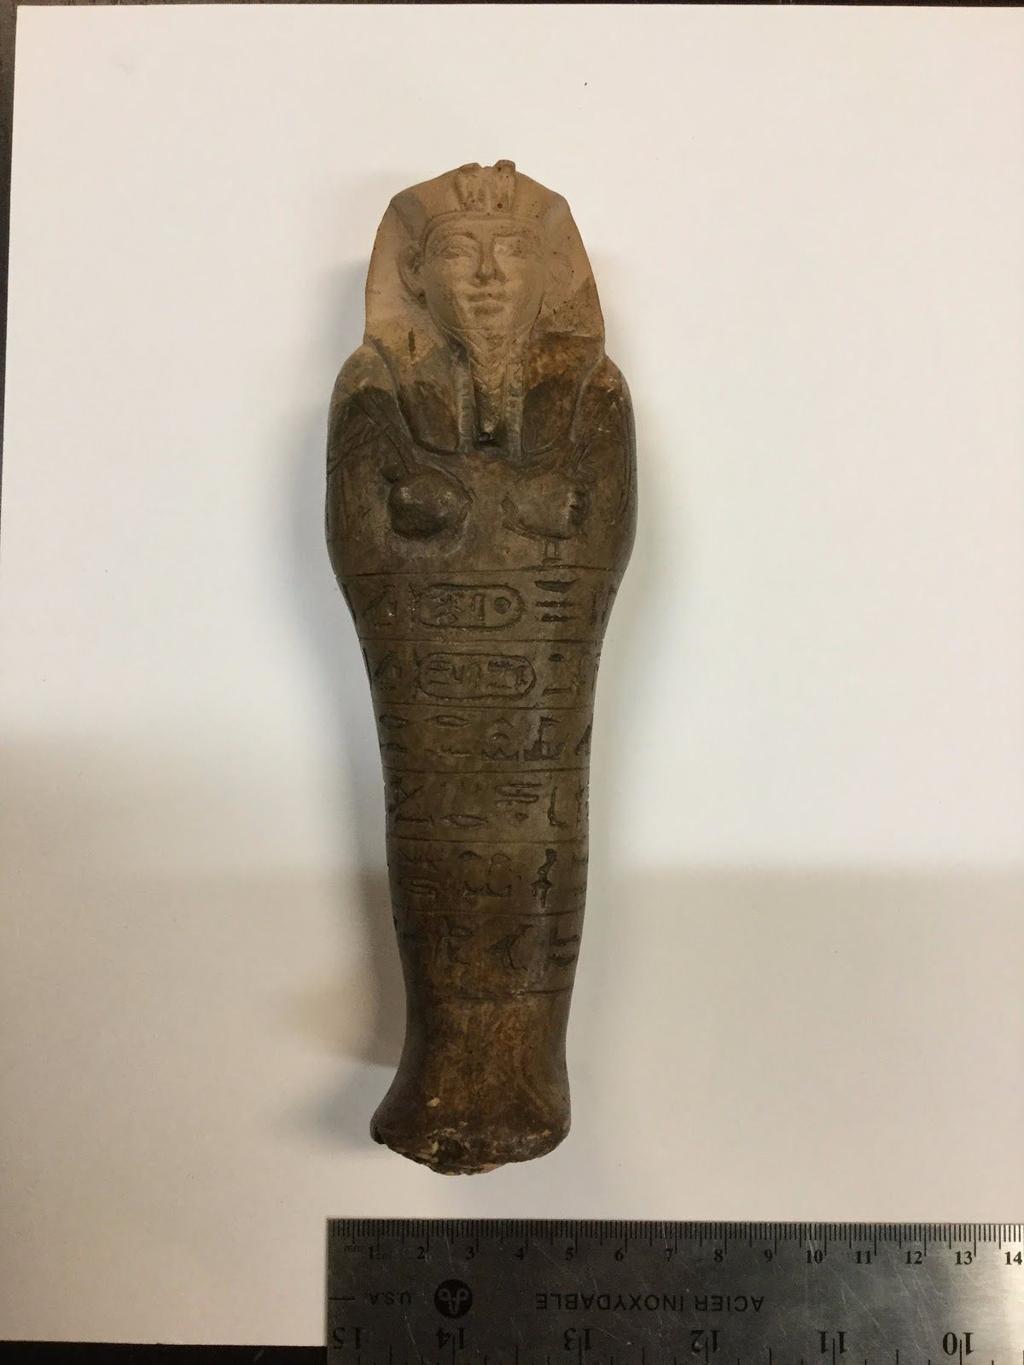 1 Introduction I chose to translate a shabti, an Egyptian funerary figurine, from the Royal Ontario Museum - actually, a replica of the shabti that belongs to the interactive children s gallery